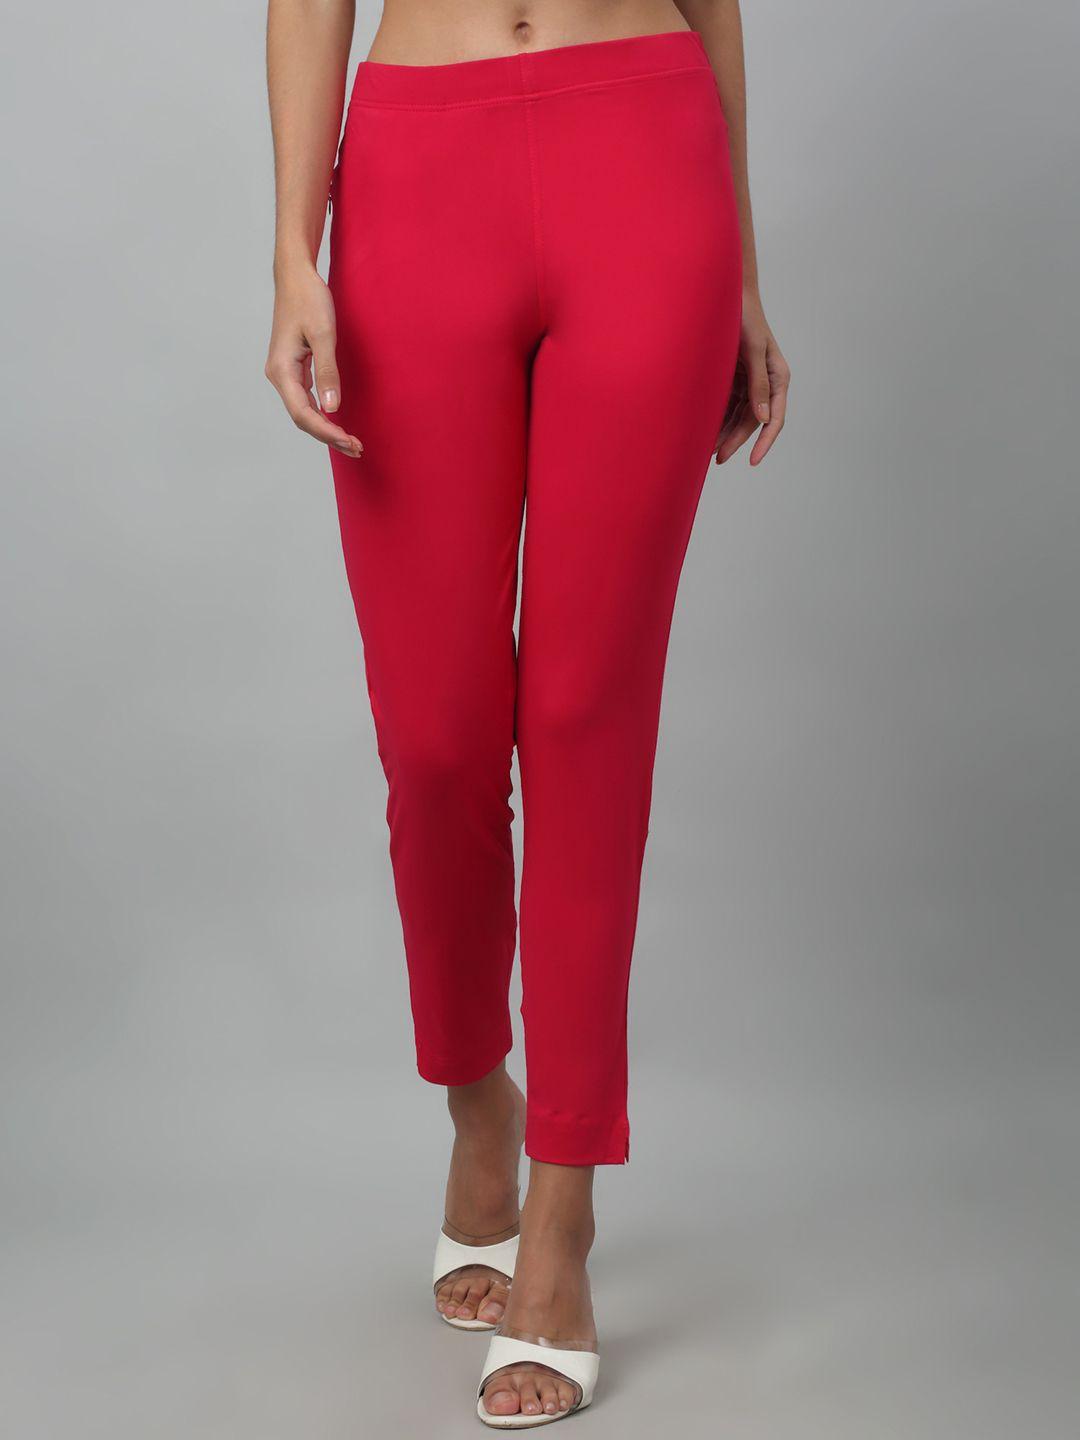 cantabil-women-pink-trousers